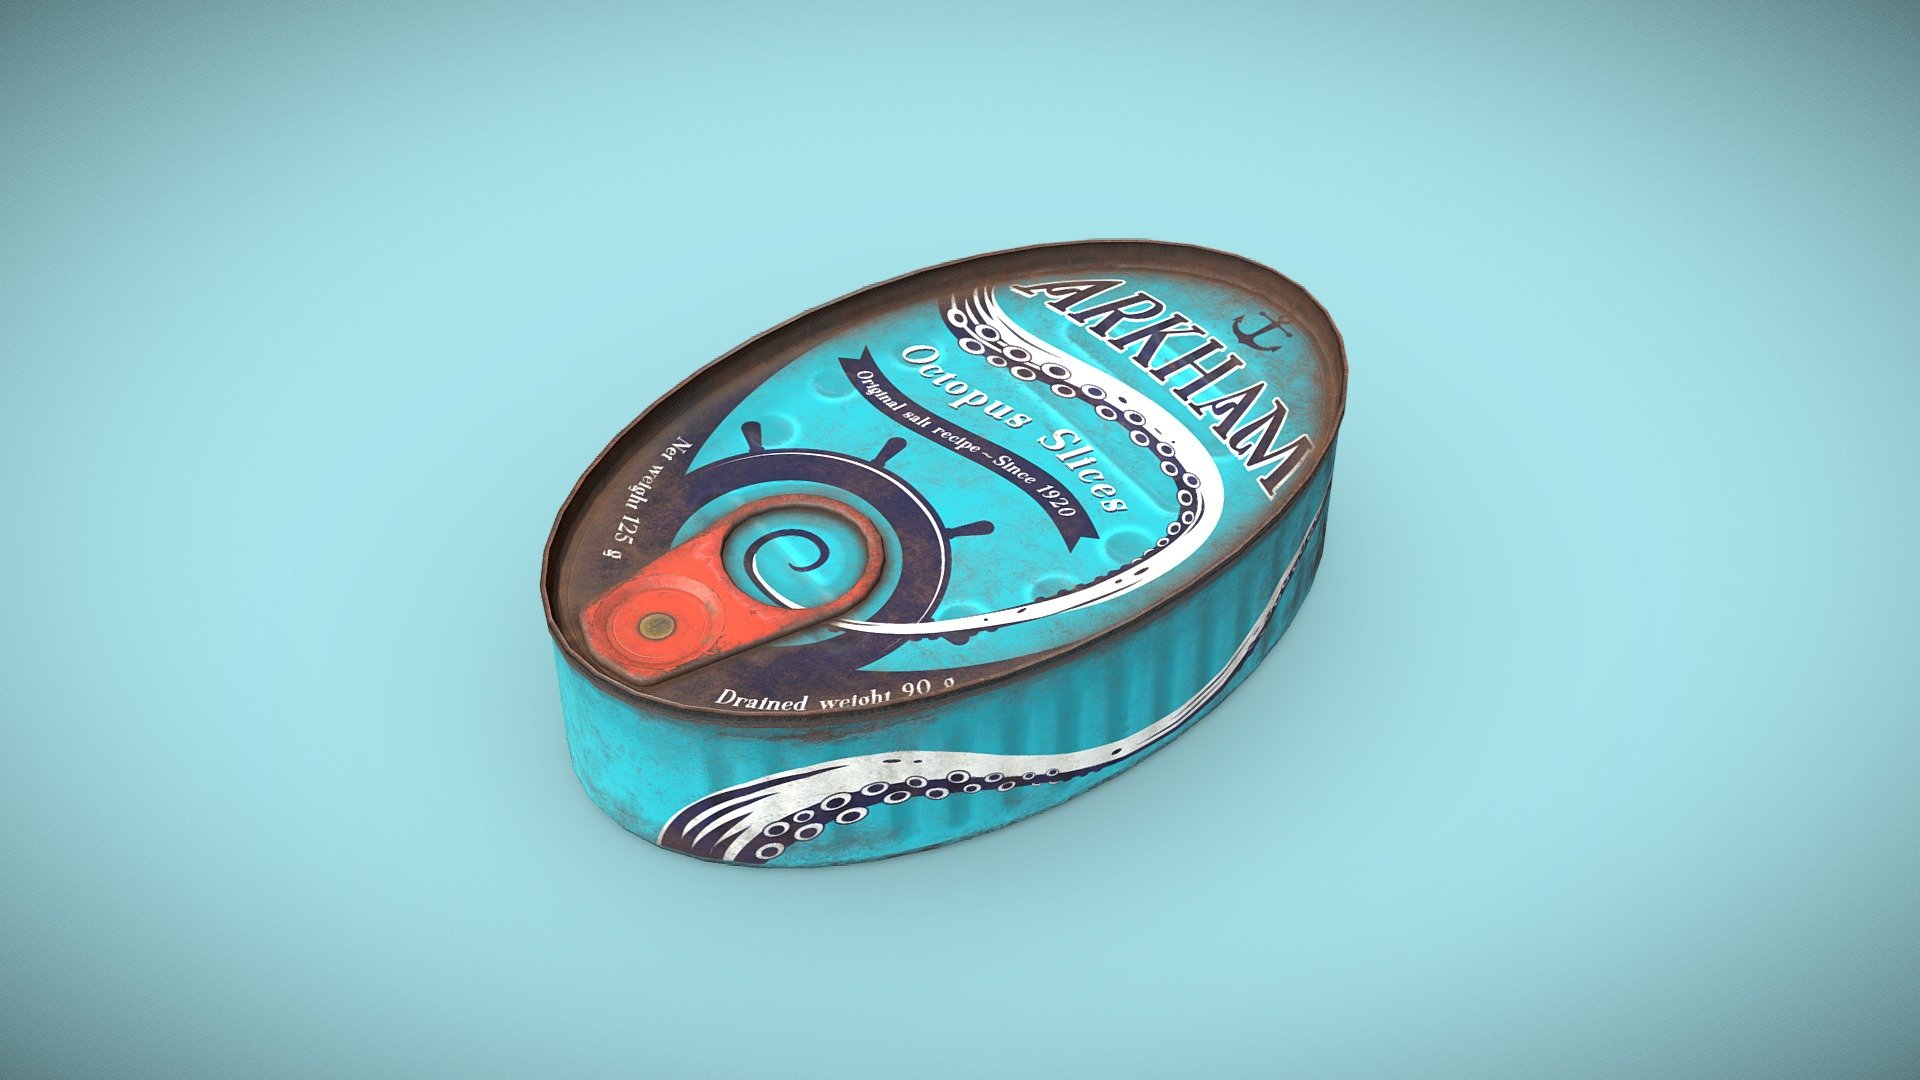 Taste the opportunity to taste the delicious octopus slices, fished in the near Arkham coasts. You will not regret it.
Low poly worn out tin octopus can with 457 polys and PBR materials in 4096x4096 3d model